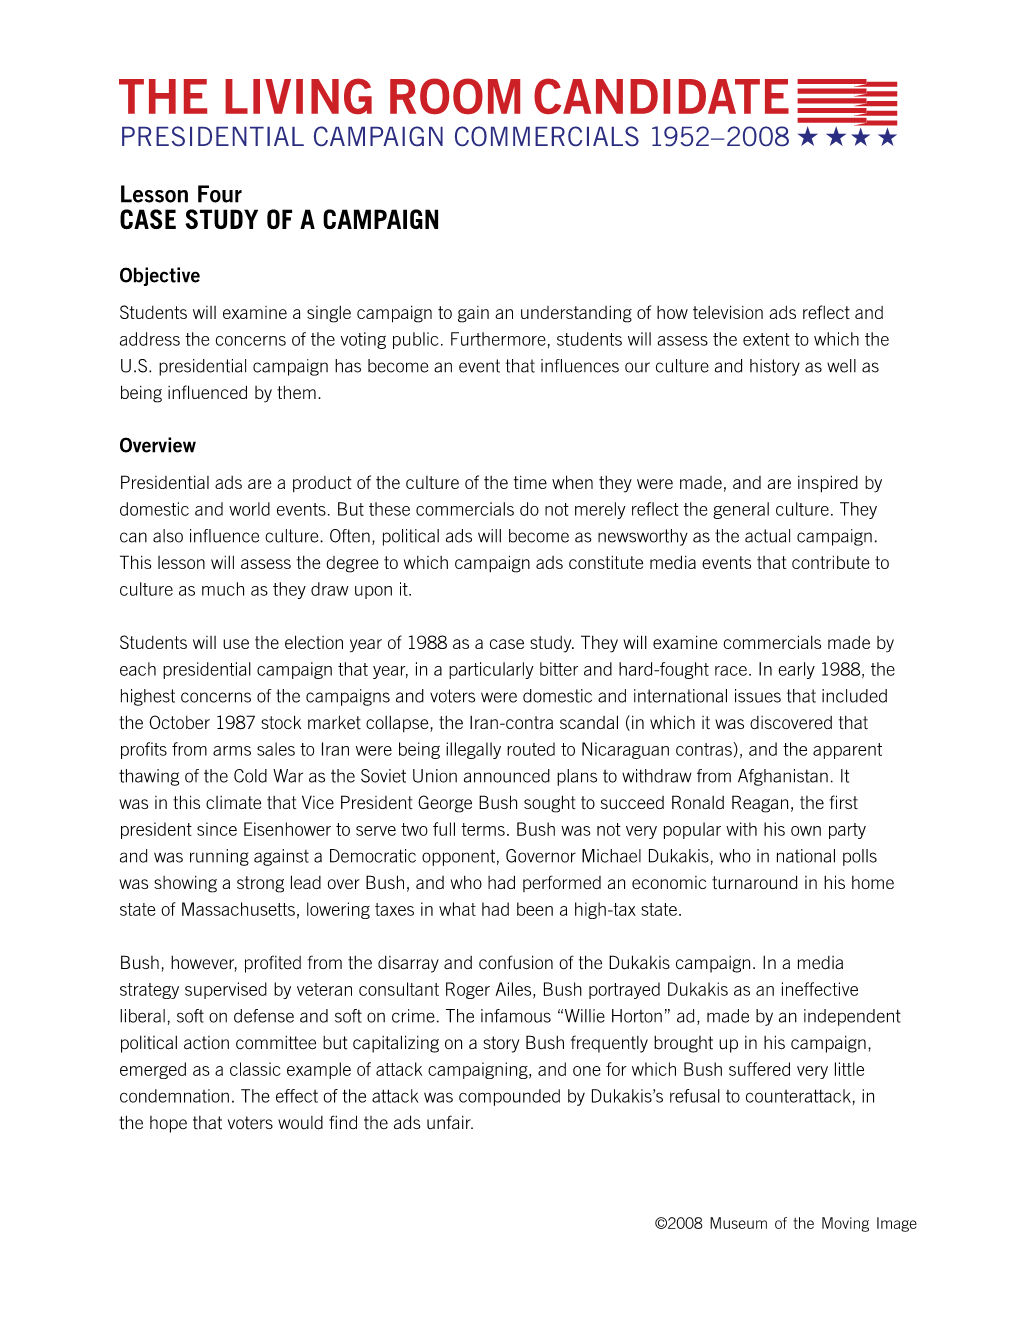 Case Study of a Campaign